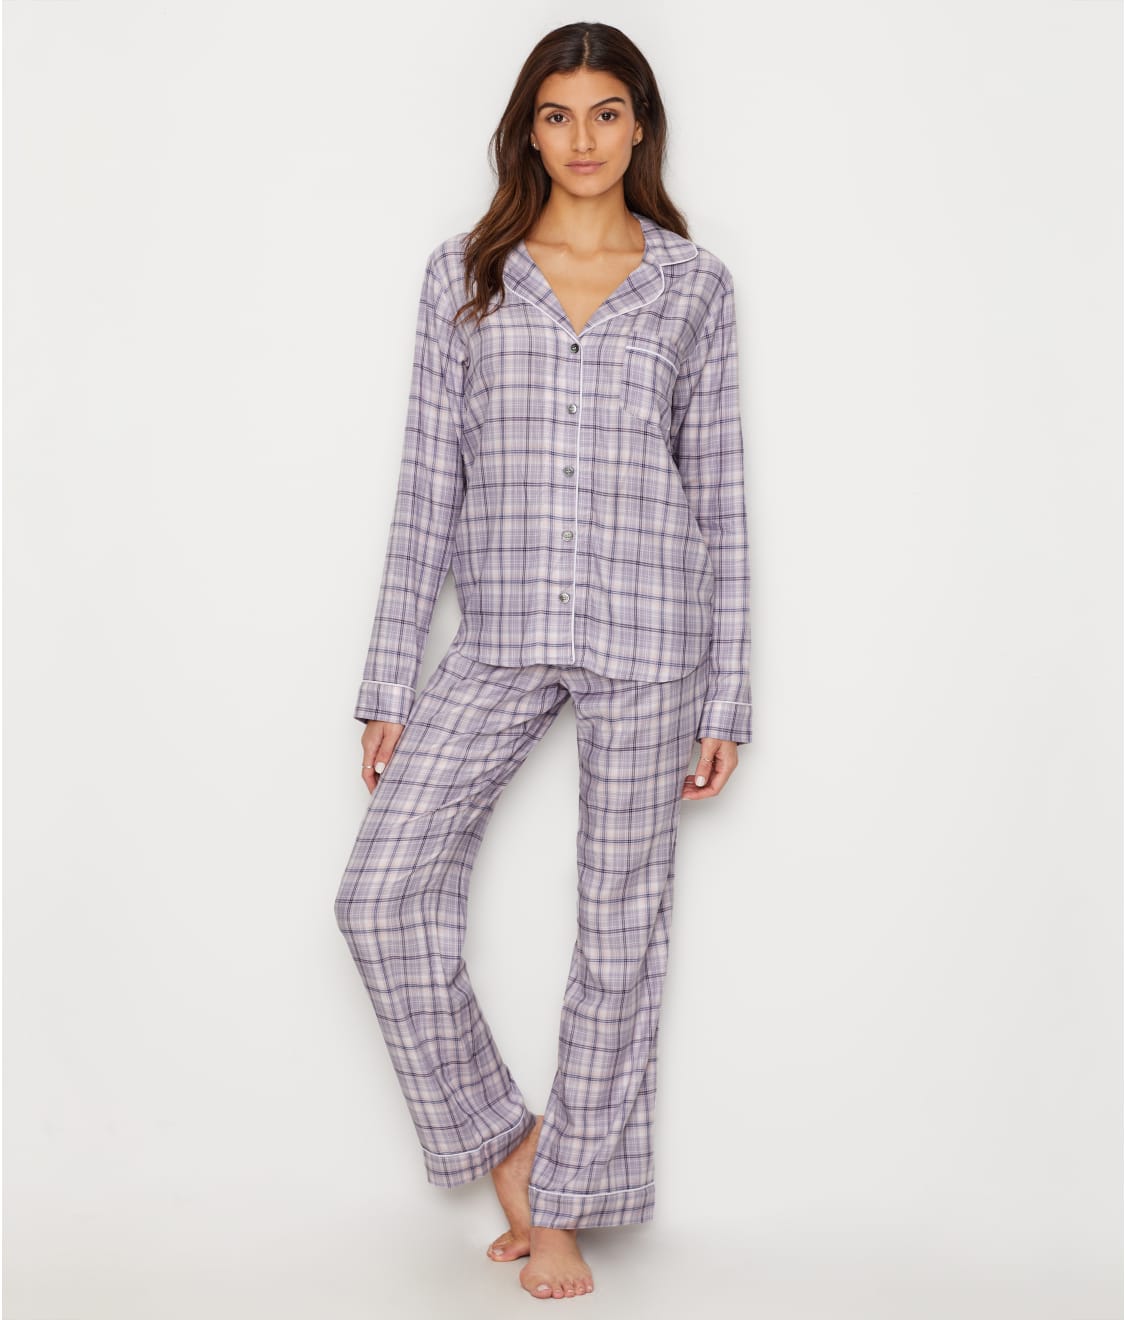 UGG Raven Woven Flannel Pajama Set & Reviews | Bare Necessities (Style ...